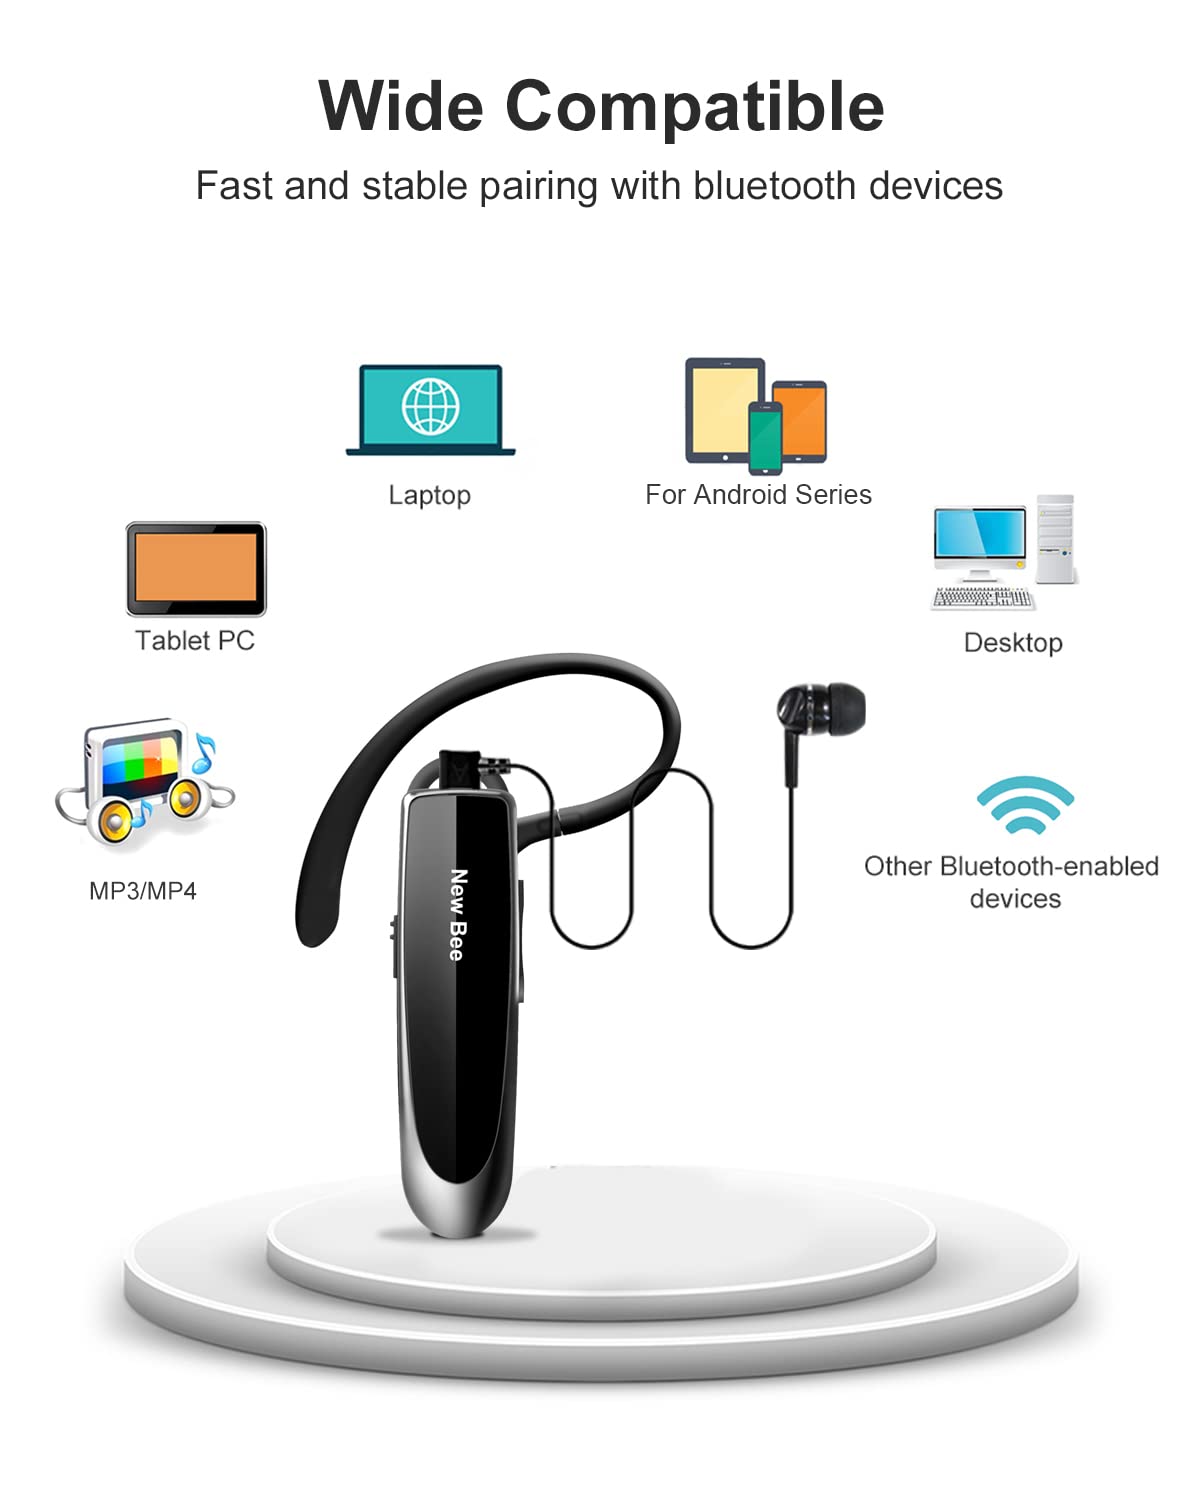 New bee [2 Pack] Bluetooth Earpiece Wireless Handsfree Headset V5.0 24 Hrs Driving Headset with Mic 60 Days Standby Time Headset Case for iPhone Android Samsung Laptop Truck Driver